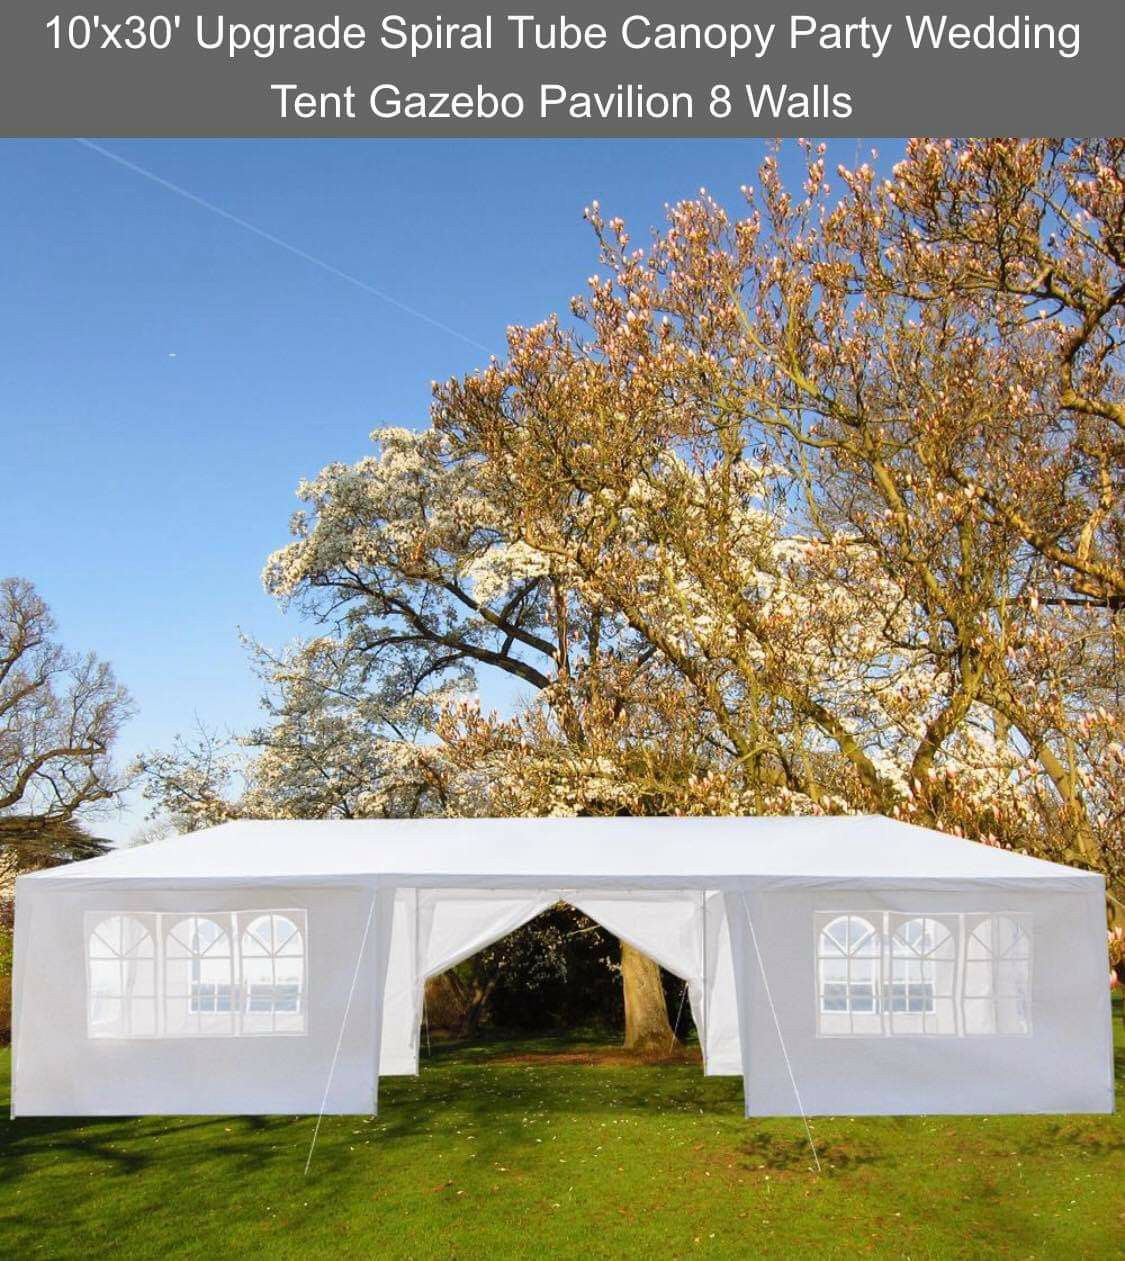 Event tents, canopies, carpas......10x10, 10x20, 10x30 holiday social distancing